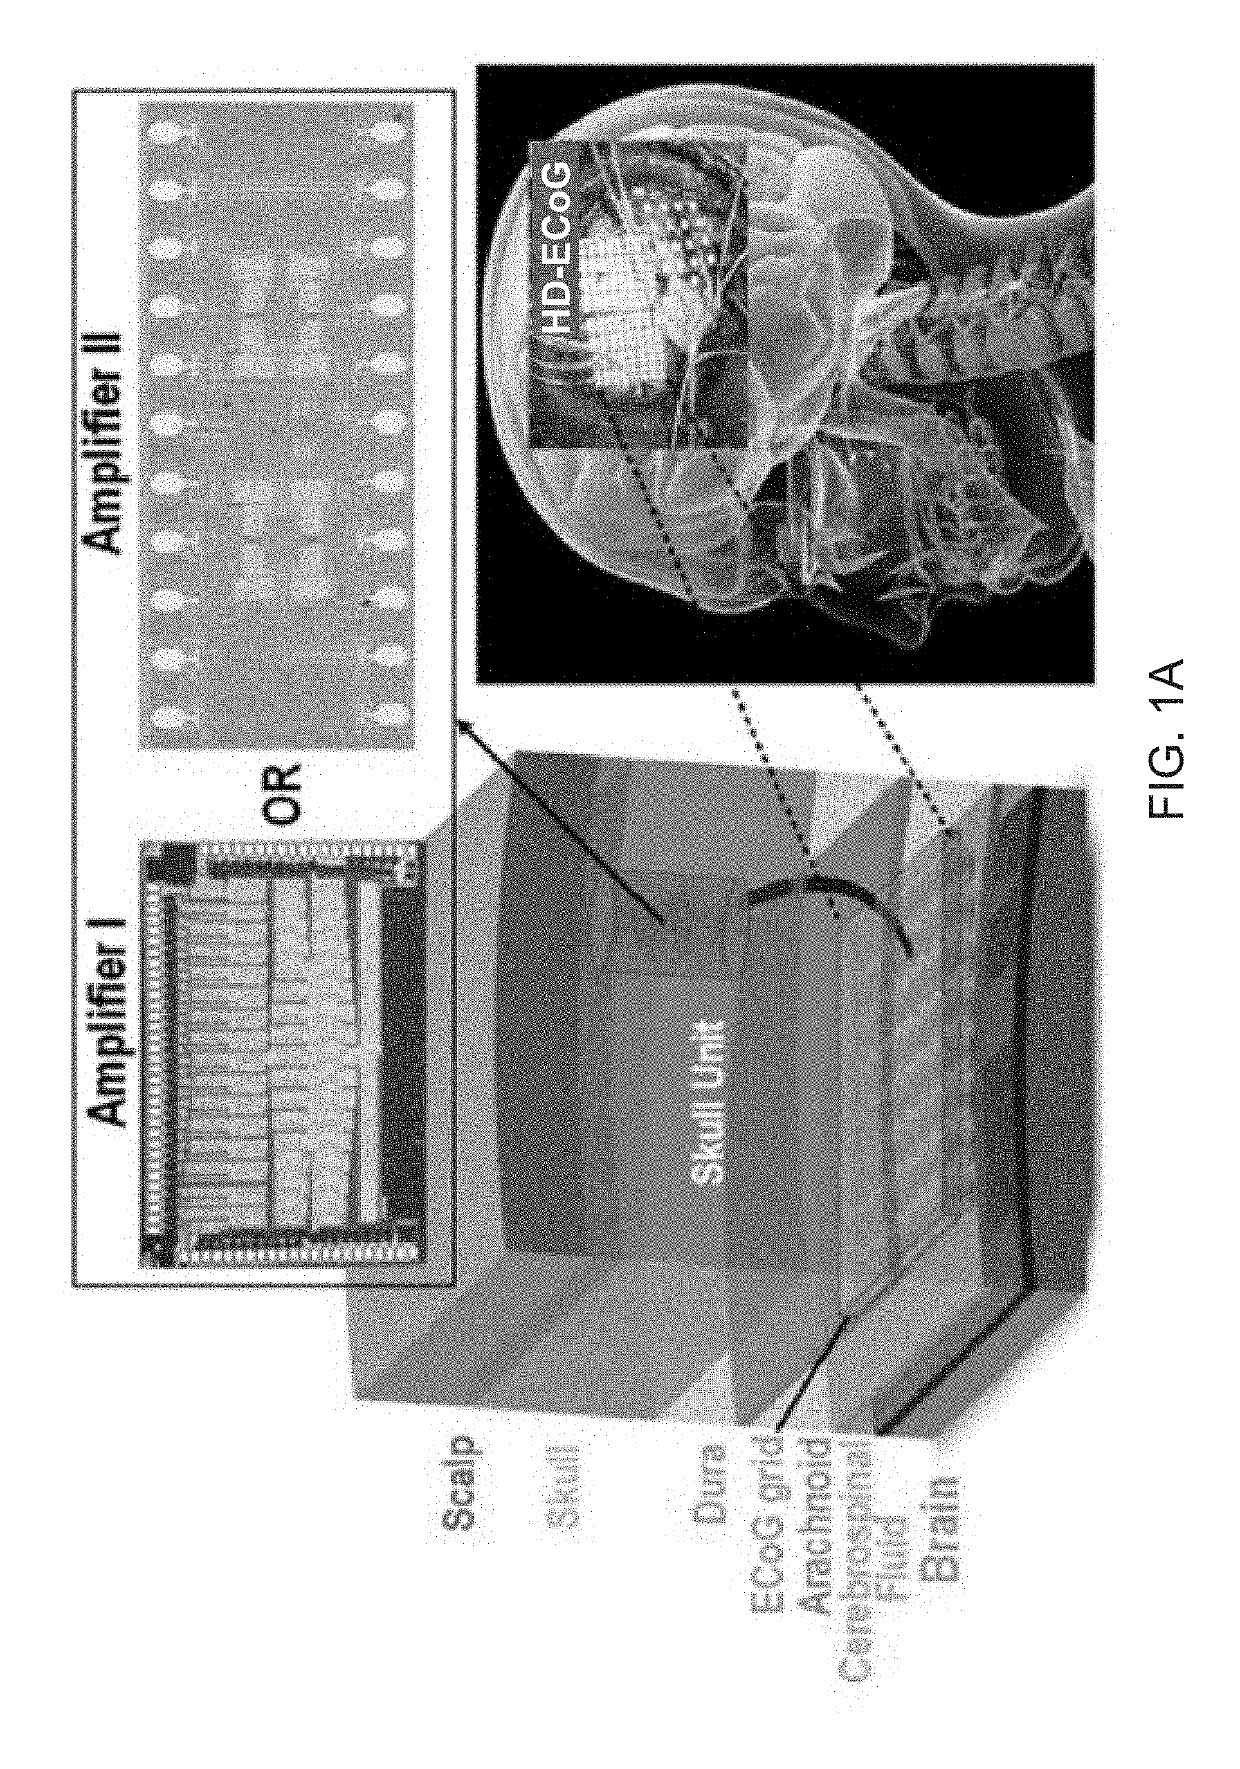 Implantable electrocorticogram brain-computer interface system for restoring extremity movement